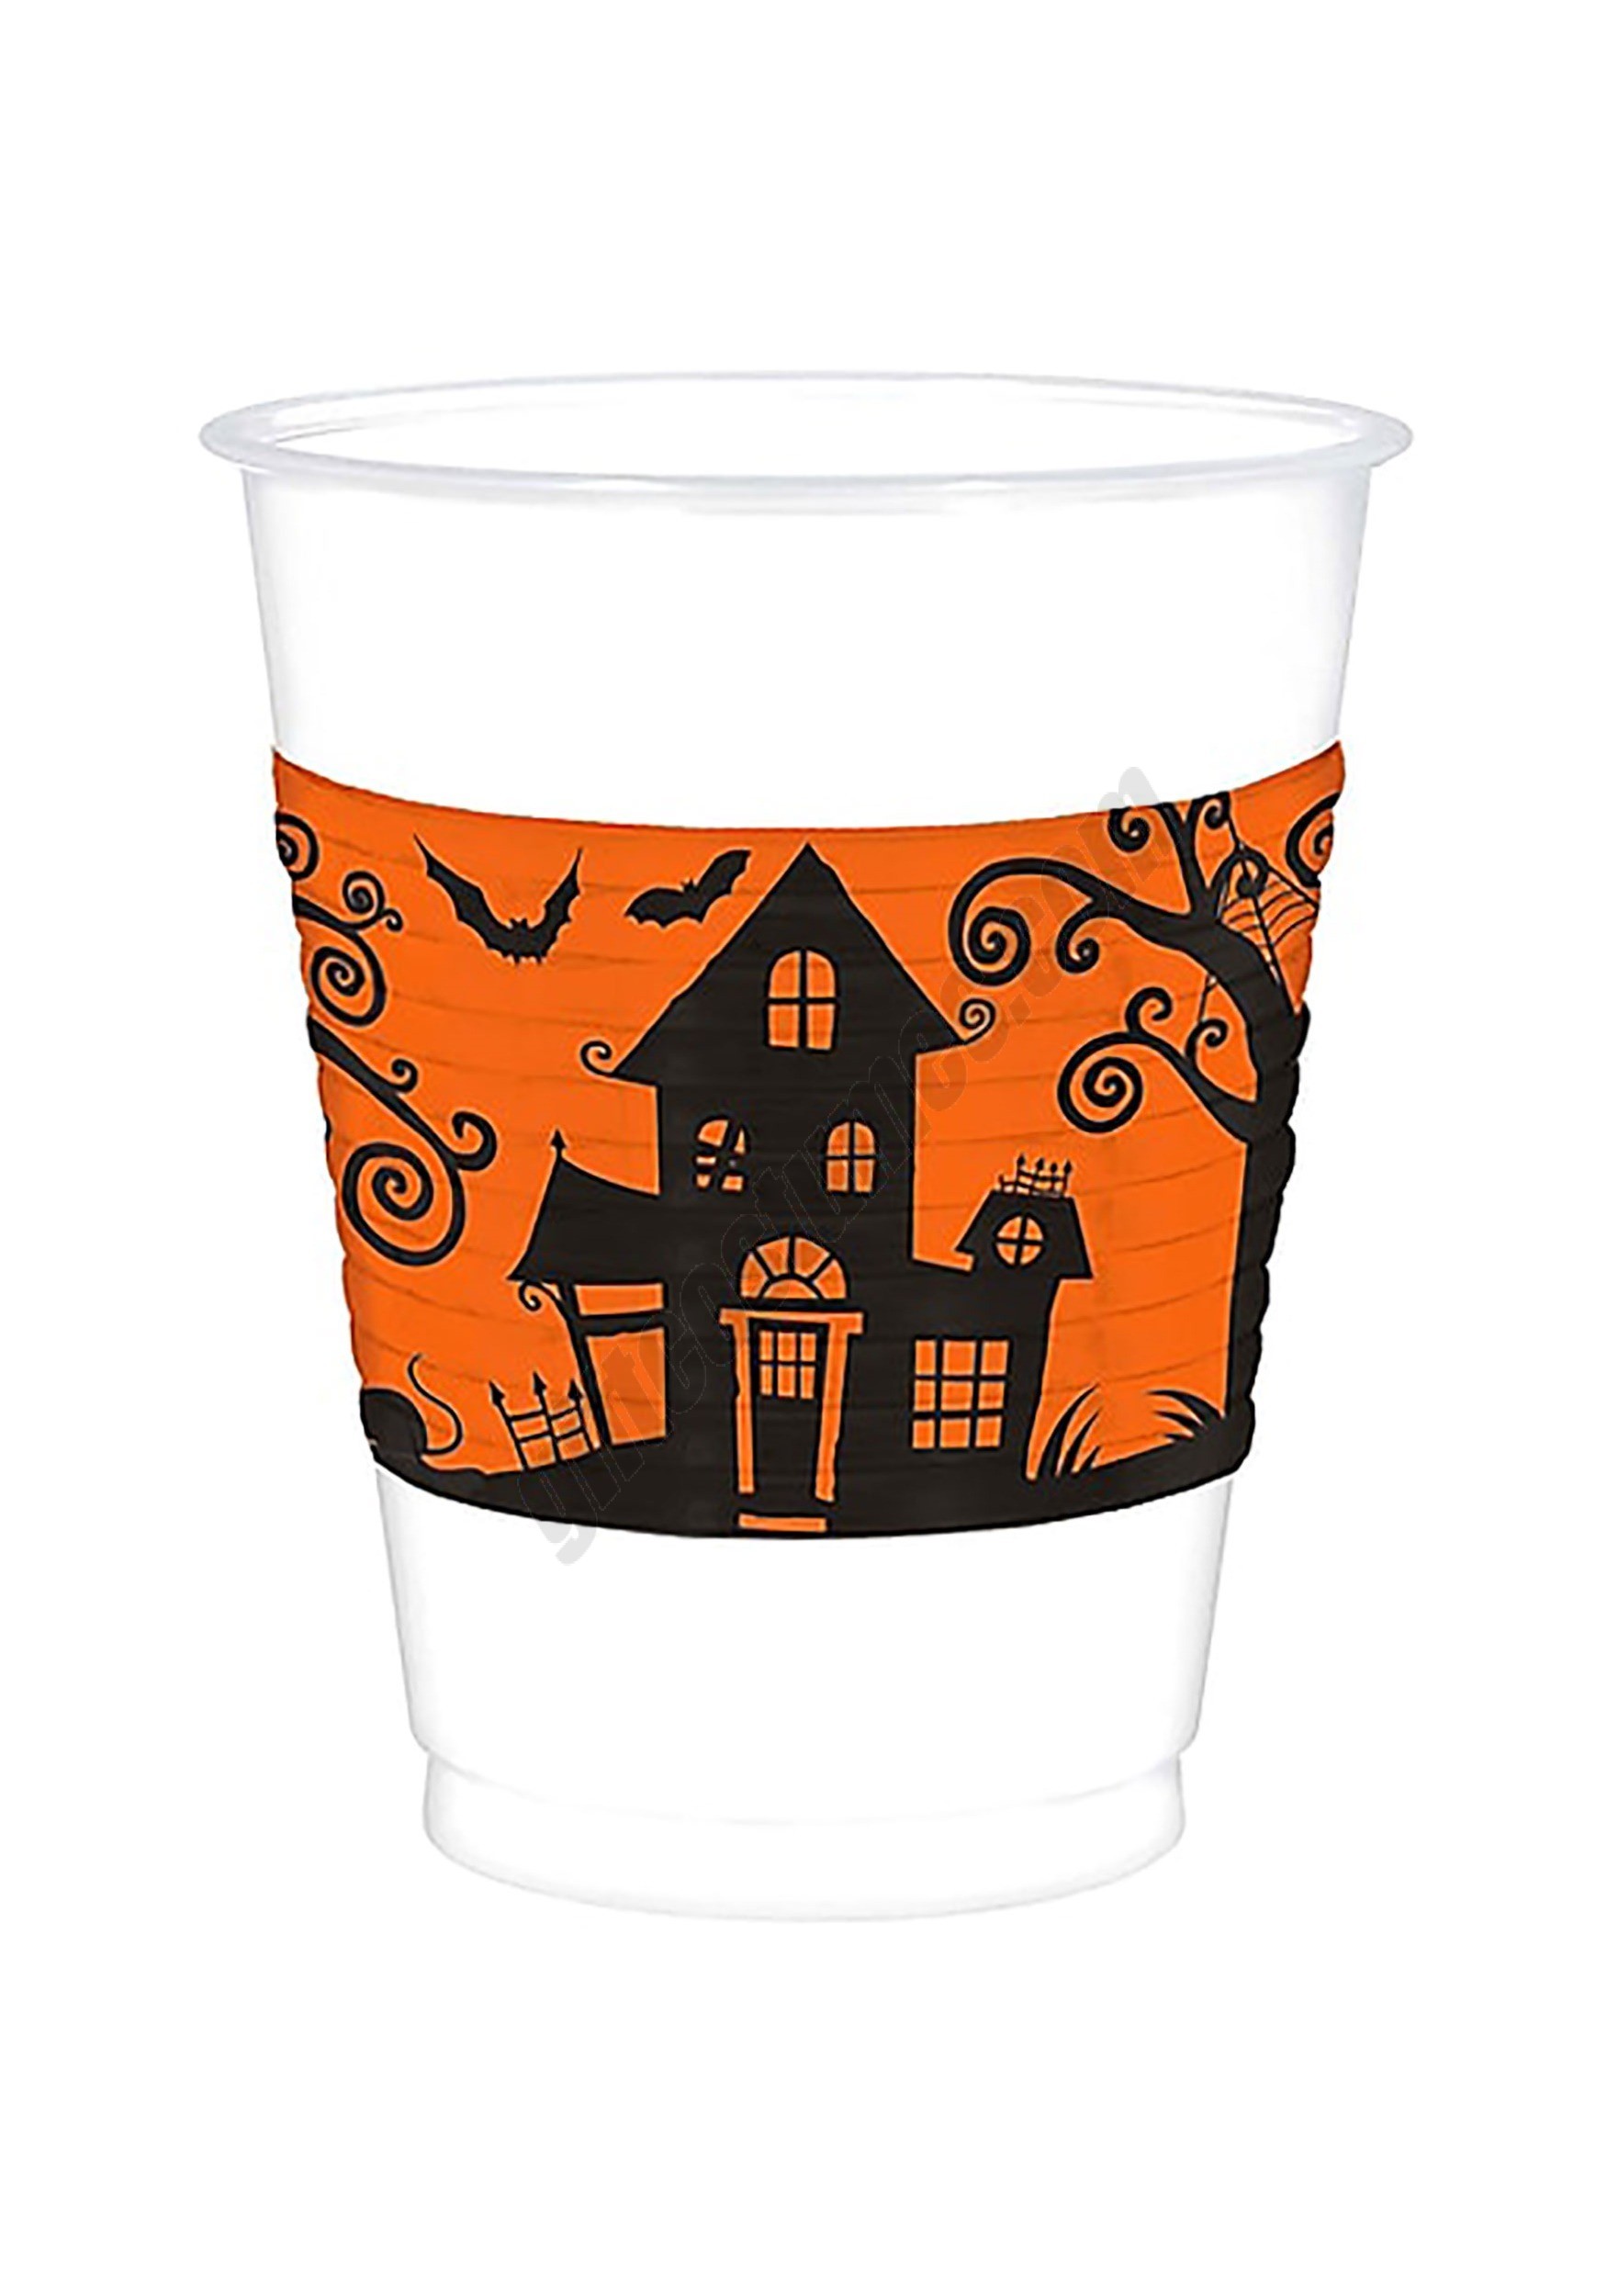 Halloween Plastic 16 oz. Party Cup 25 Ct. Promotions - Halloween Plastic 16 oz. Party Cup 25 Ct. Promotions